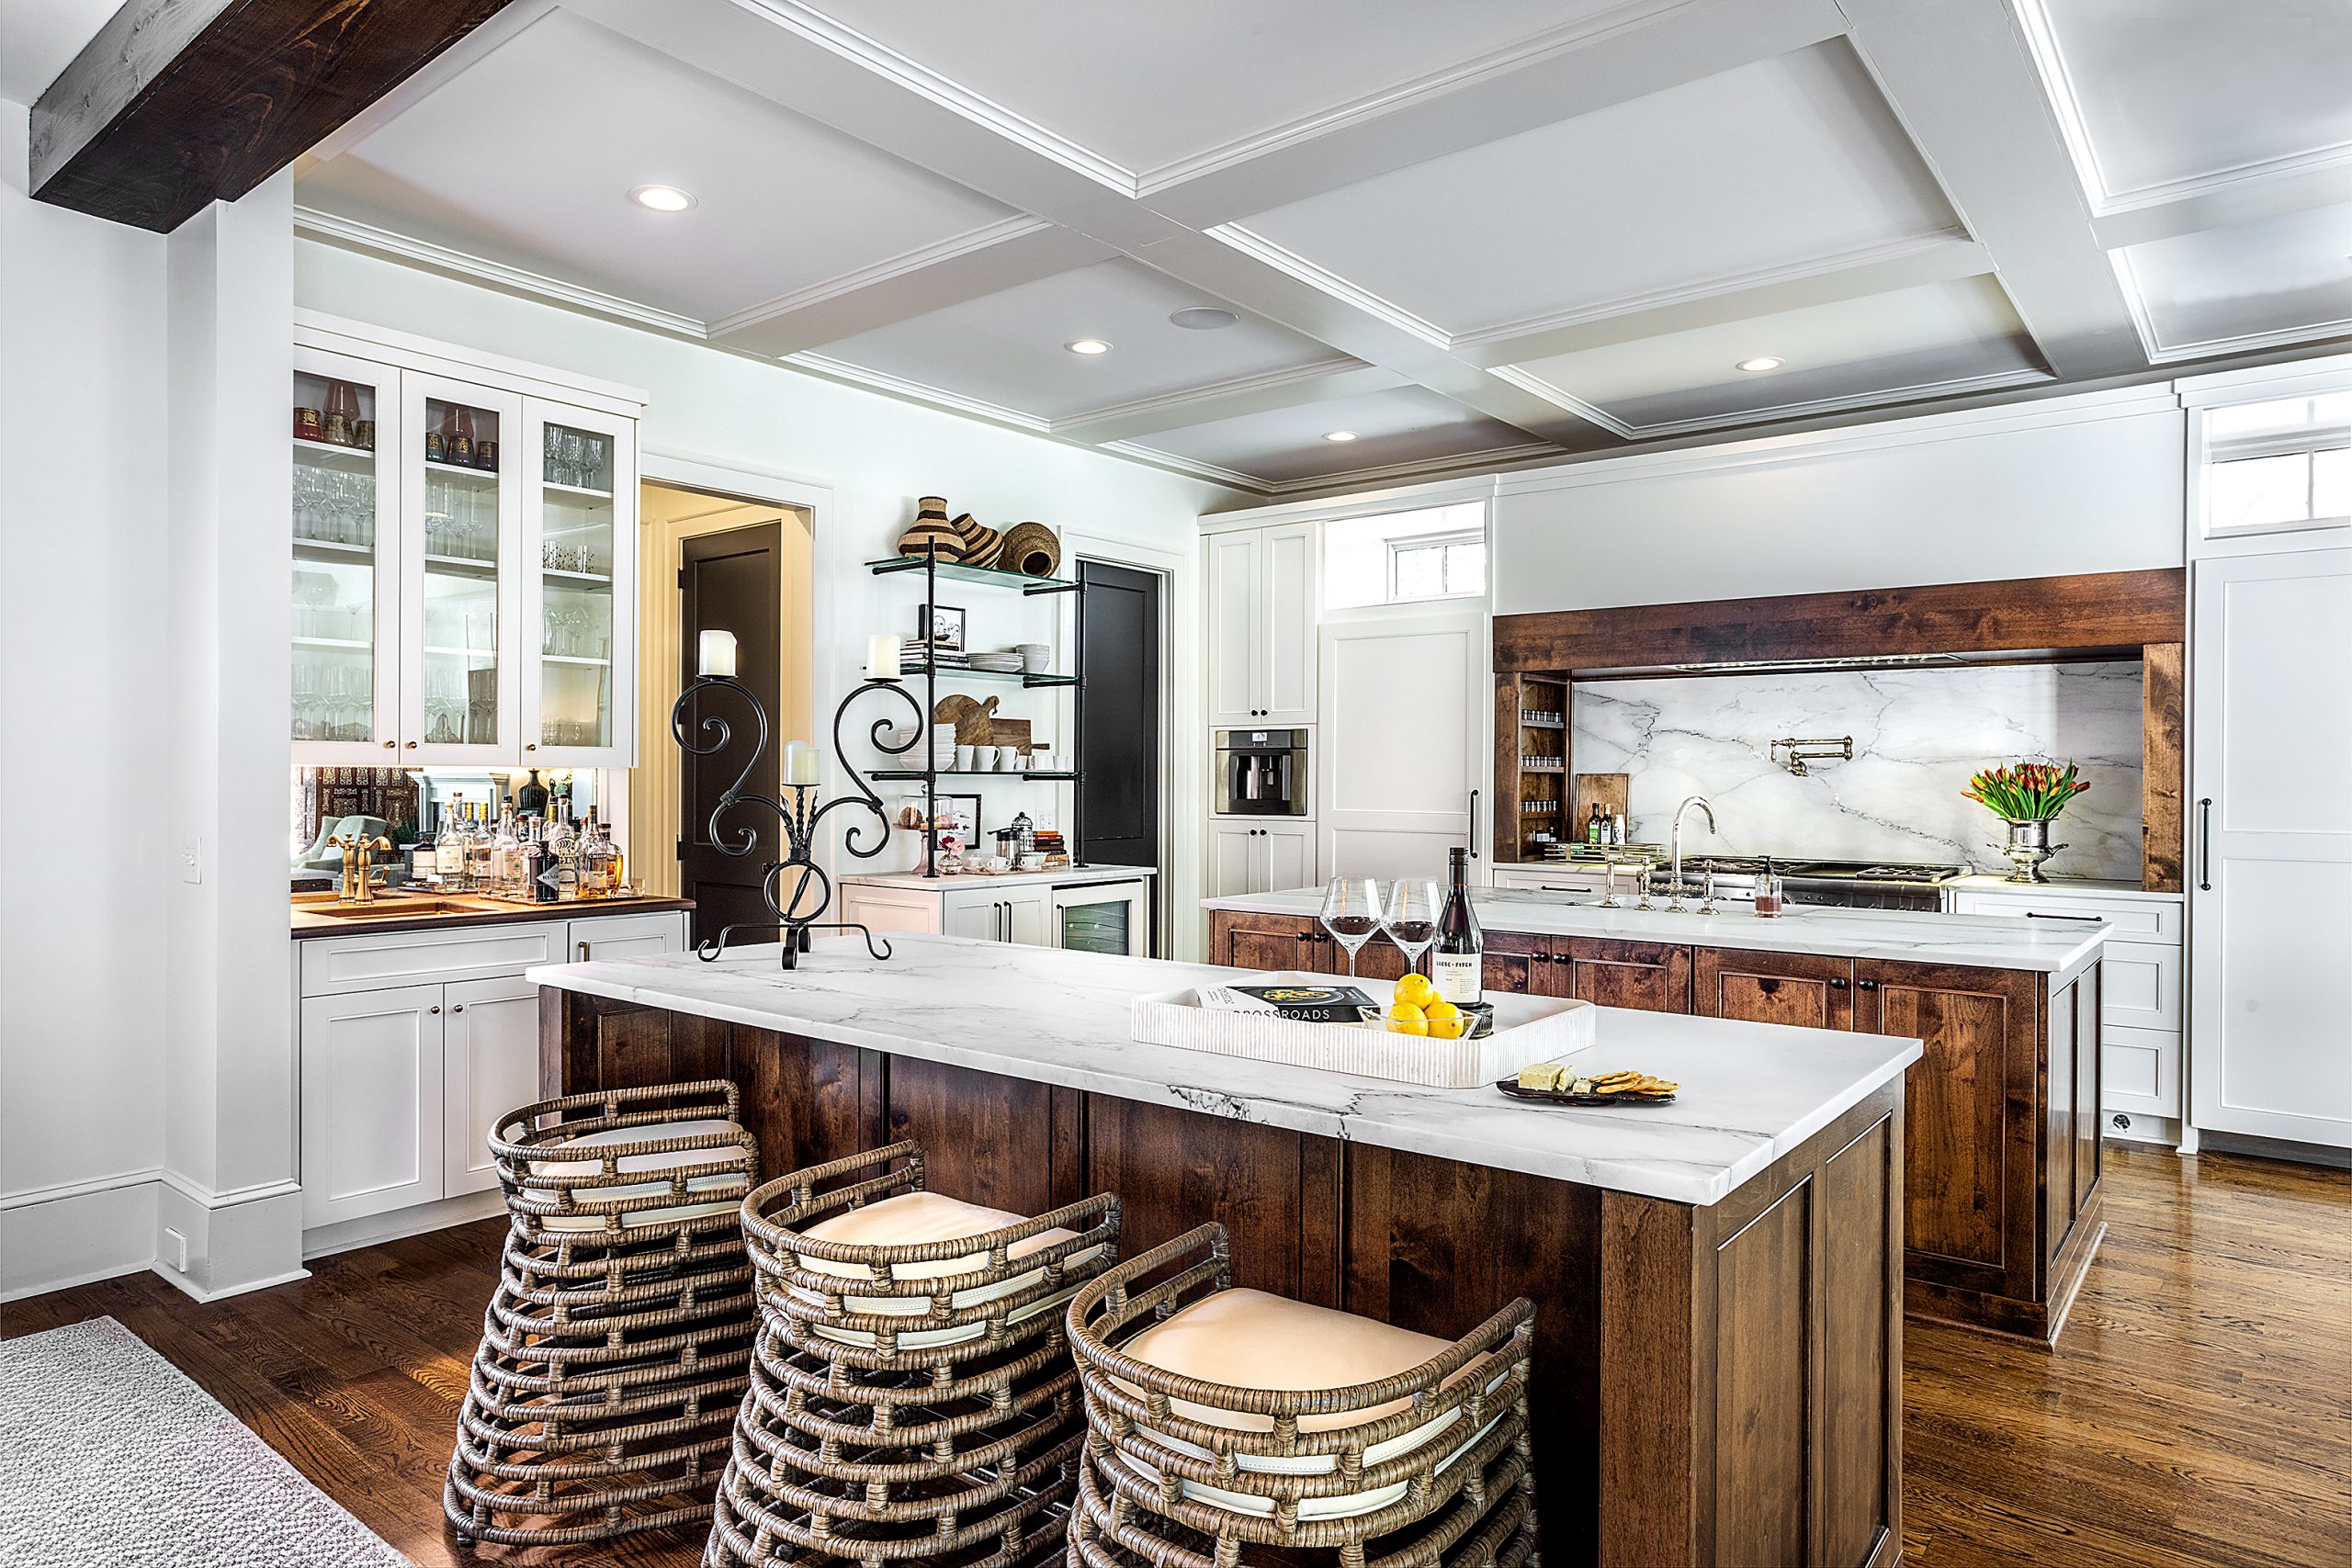 The sleek marble slabs offer Kim, who loves to cook, a clean and clear work surface. The hardwood floors, walnut islands, cooktop surround, and ceiling beams warm the space. Palechek barstools add sophisticated flair and elegance.